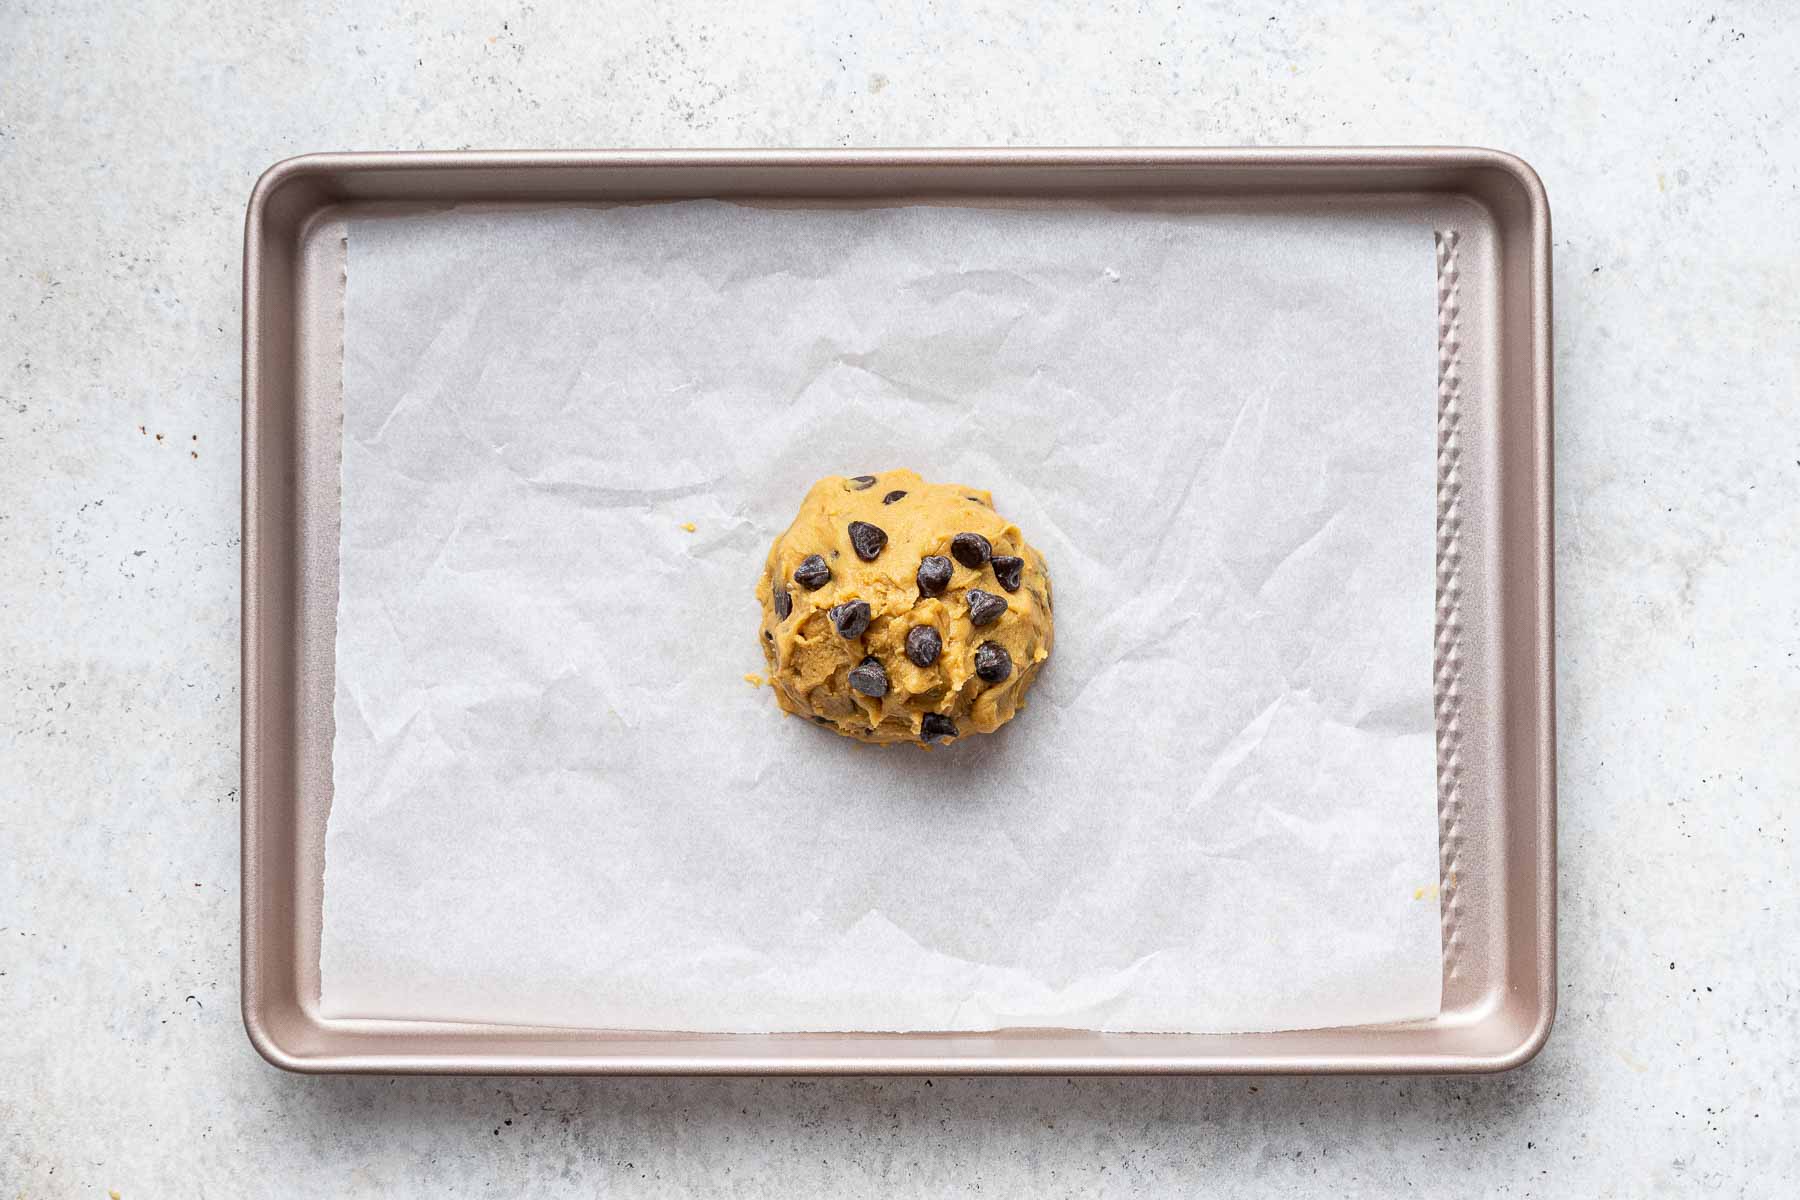 Pressing extra chocolate chips on a raw cookie before baking.